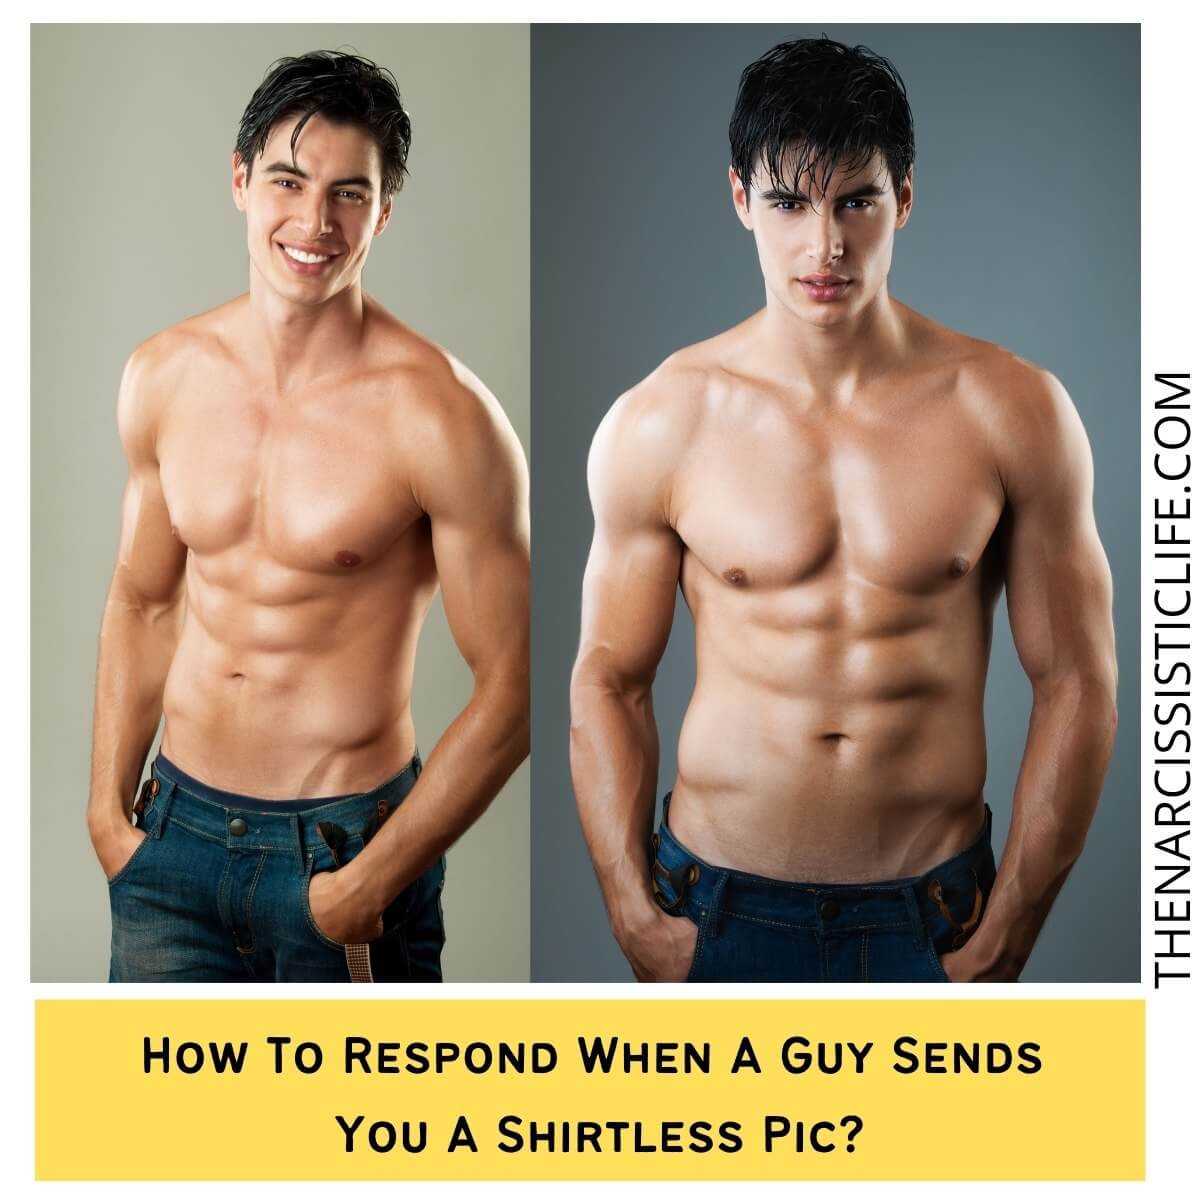 How to Compliment A Guy When He Sends You A Picture? - The Narcissistic Life